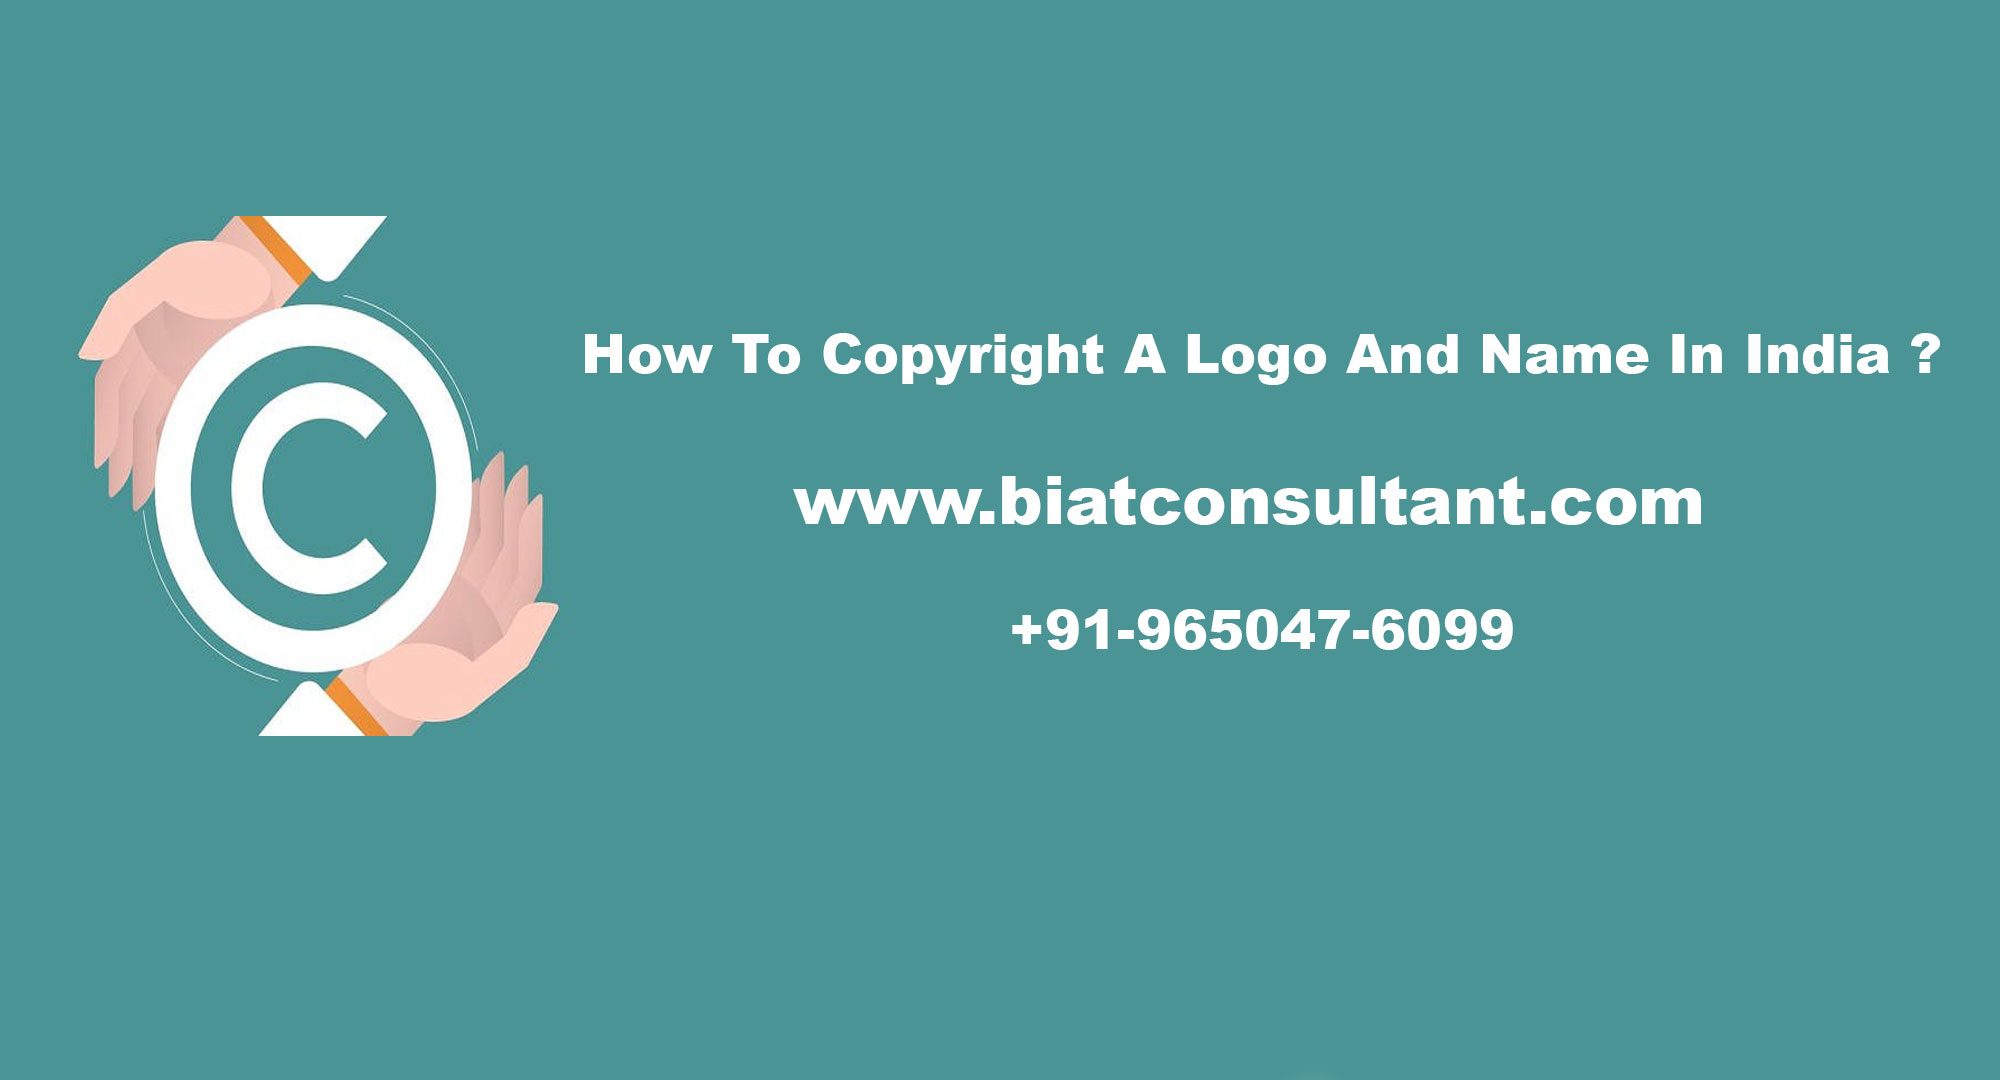 How-to-copyright-a-logo-and-a-name-in-India